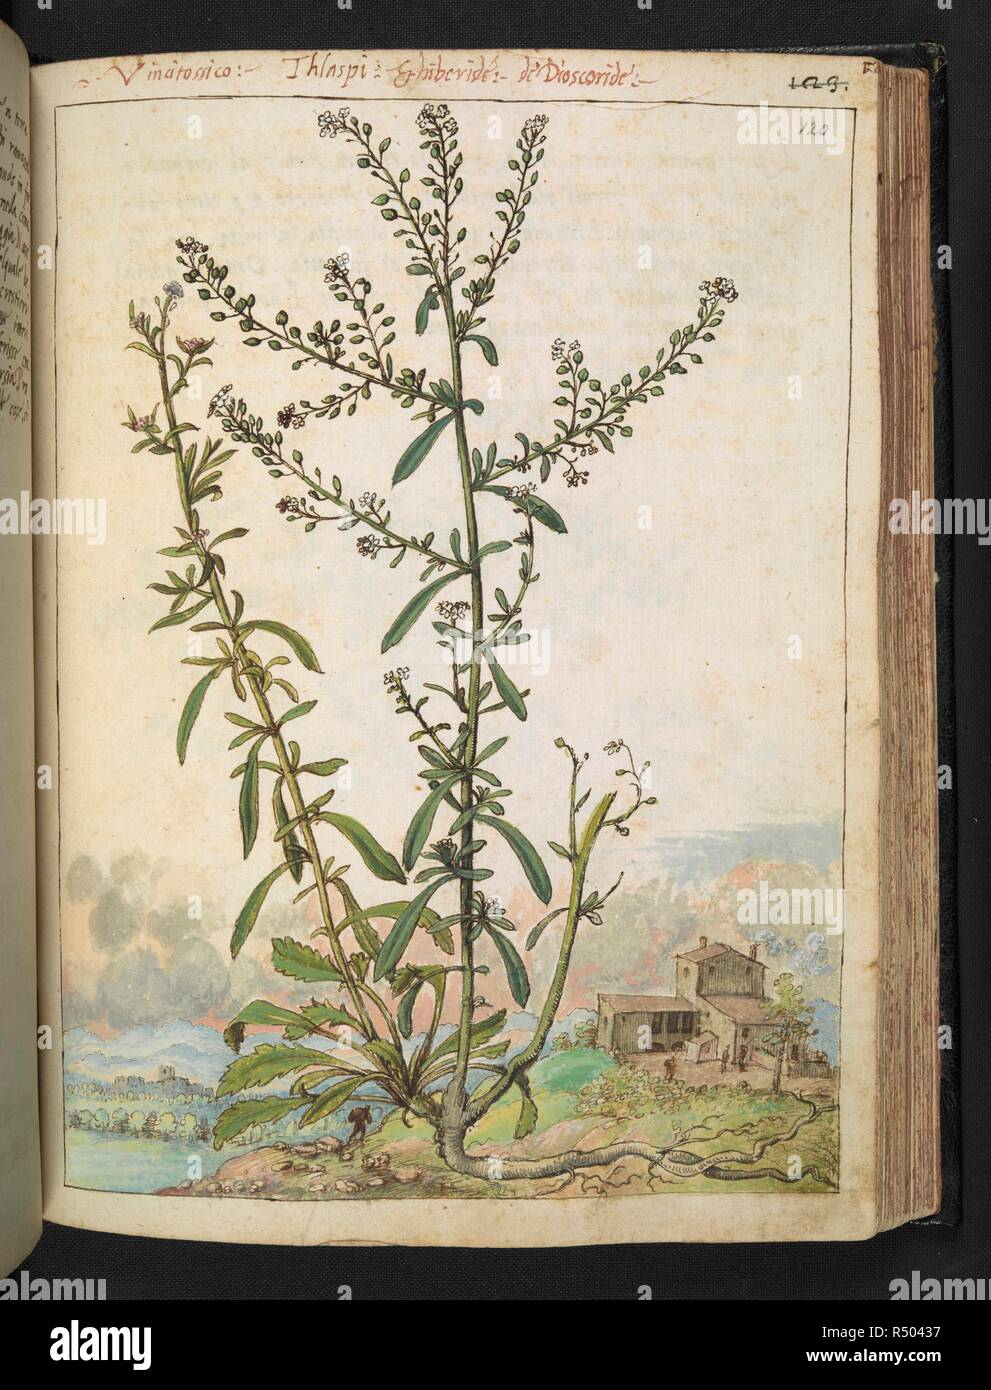 Thlaspi.'  Thlaspi, pennycress is a genus of herbs.  . Coloured drawings of plants, copied from nature in the Roman States, by Gerardo Cibo. Vol. I. Pietro Andrea Mattioli, Physician, of Siena: Extracts from his edition of Dioscorides' 'de re Medica':. Italy, c. 1564-1584. Source: Add. 22332 f.120. Language: Italian. Author: Cibo, Gheraldo. Stock Photo